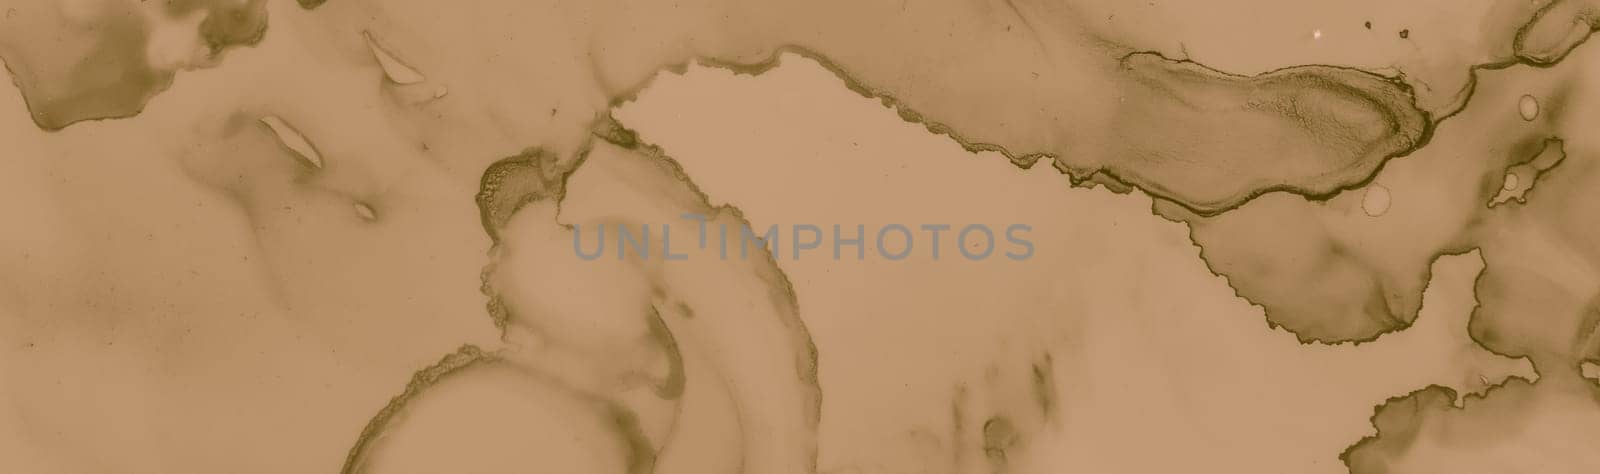 Abstract Coffee Splash. Grunge Brown Pattern. Antique Old Parchment. Watercolour Chocolate Template. Abstract Coffee Stains. Liquid Brown Texture. Creative Old Parchment. Abstract Coffee Paint.